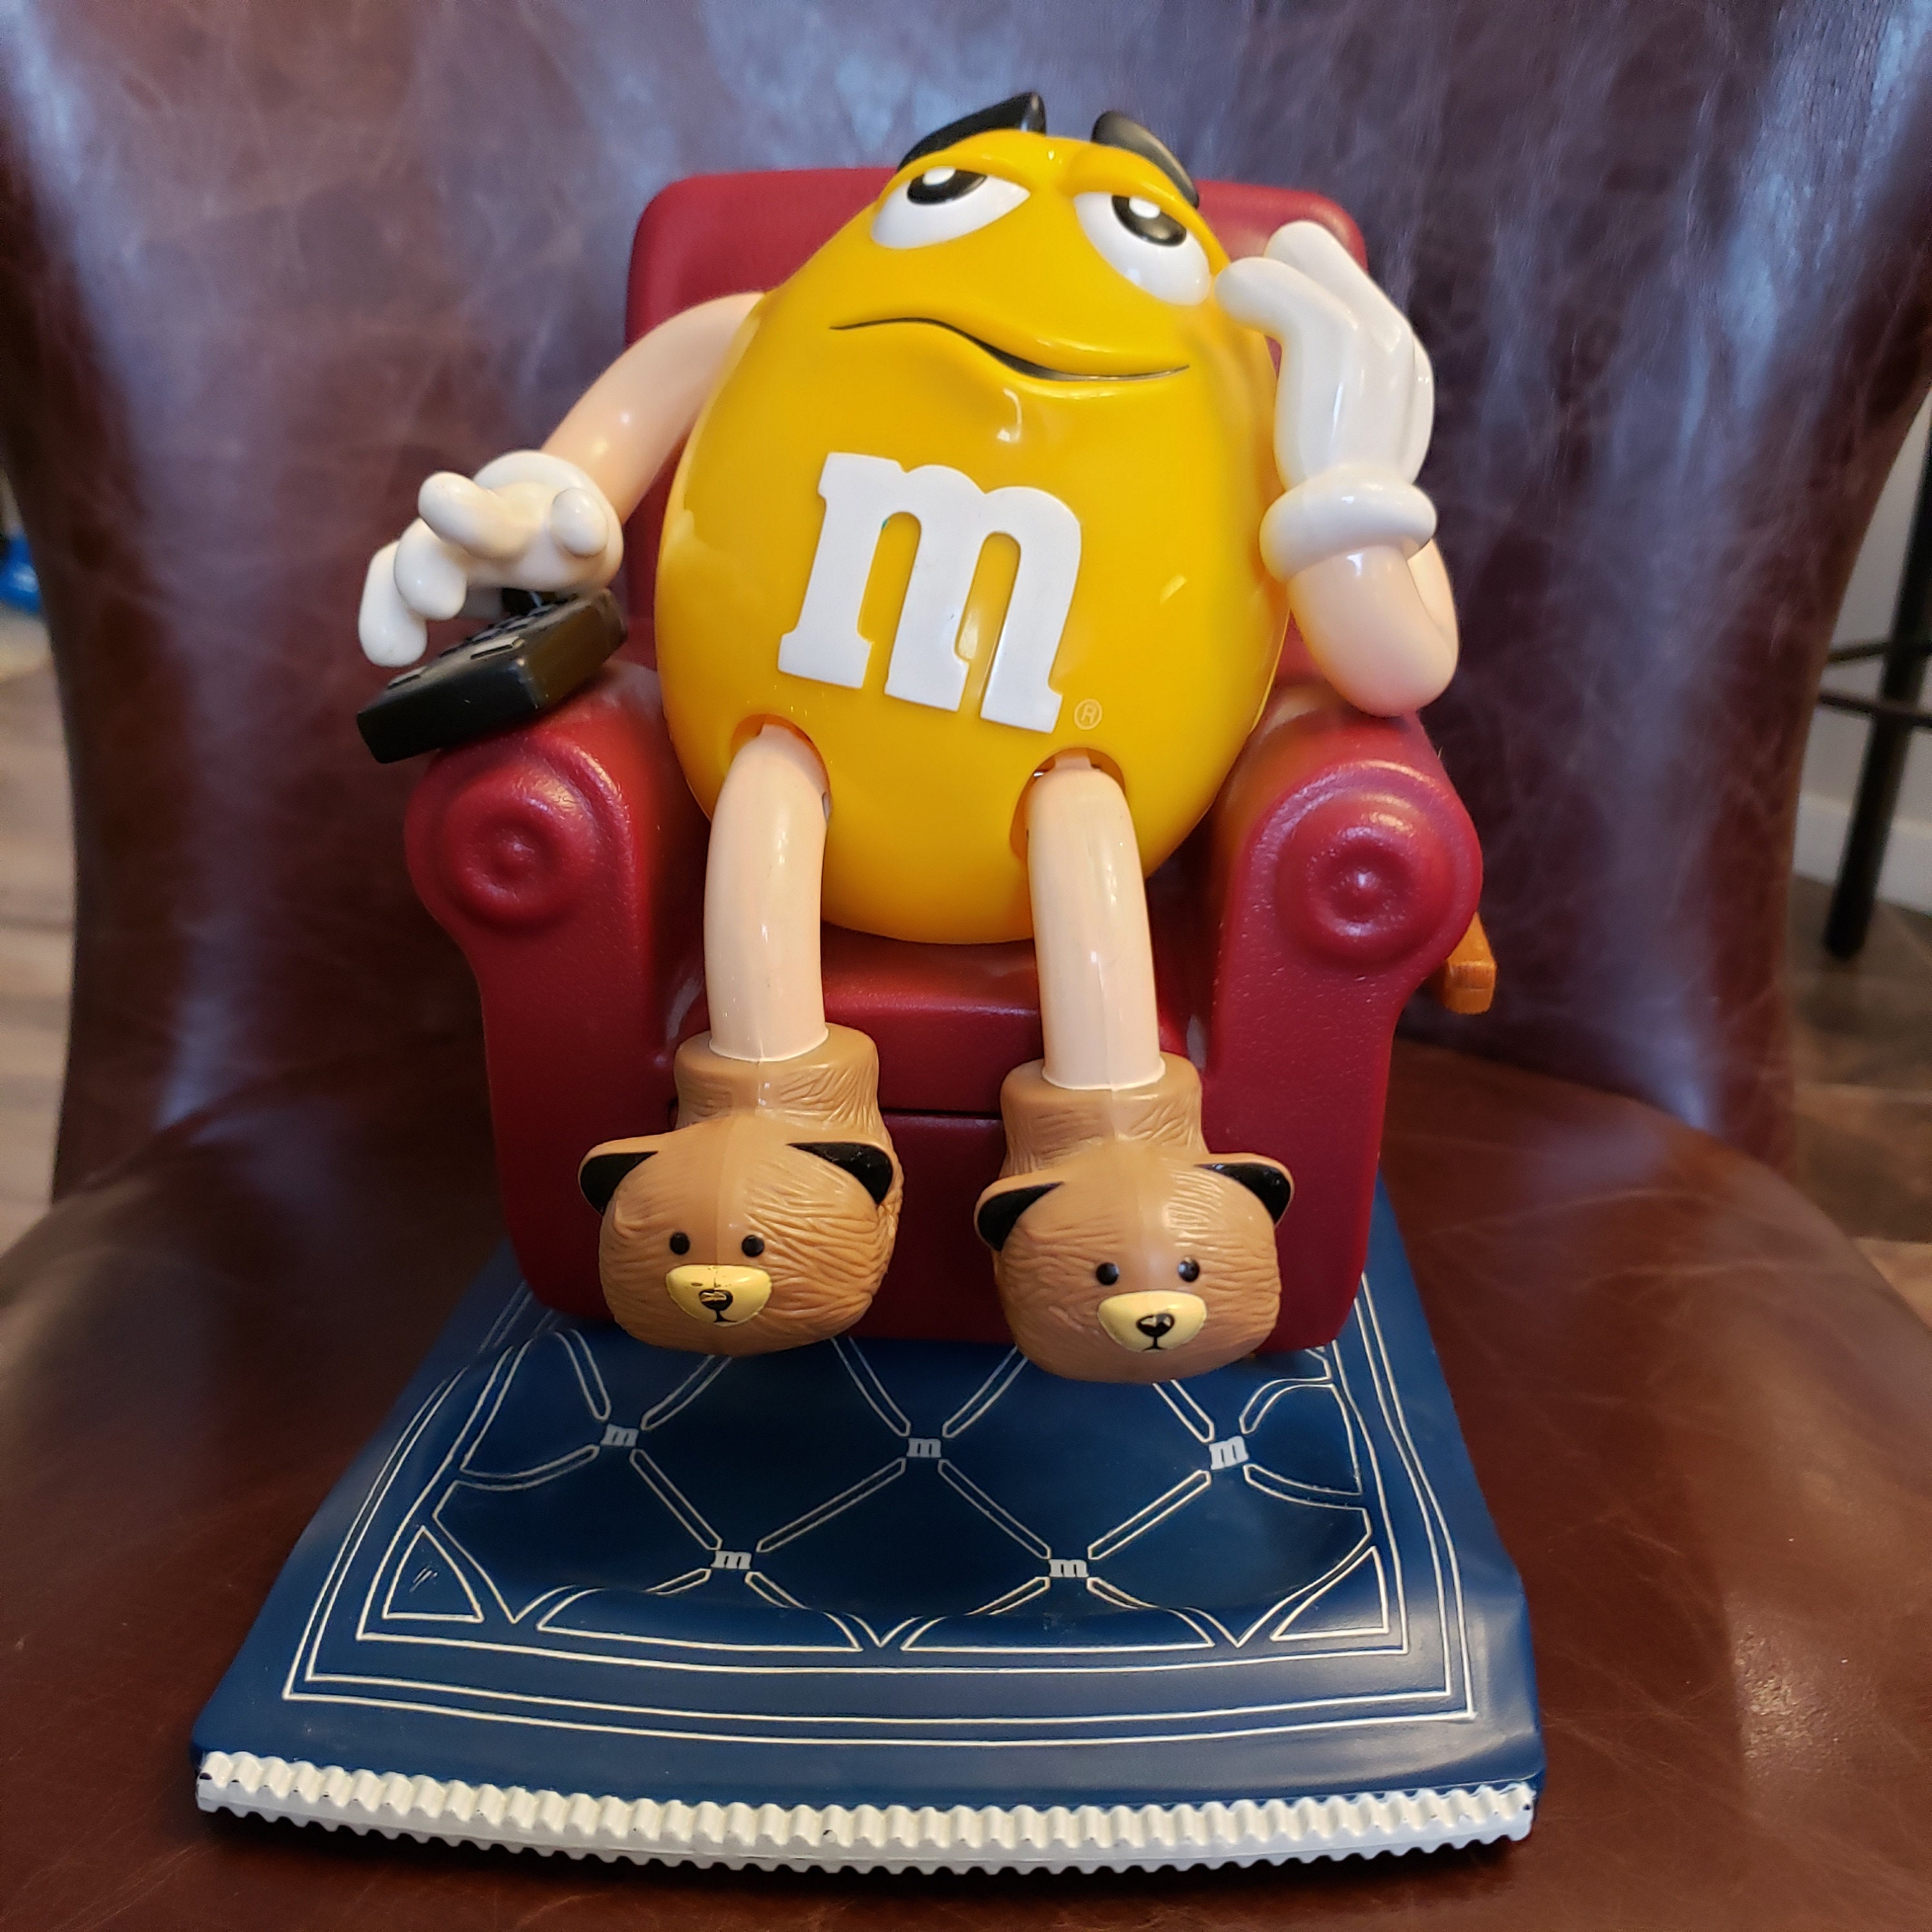 M&M Chocolate Lady Brown Store Candy Display Character on Wheels  Collectible.